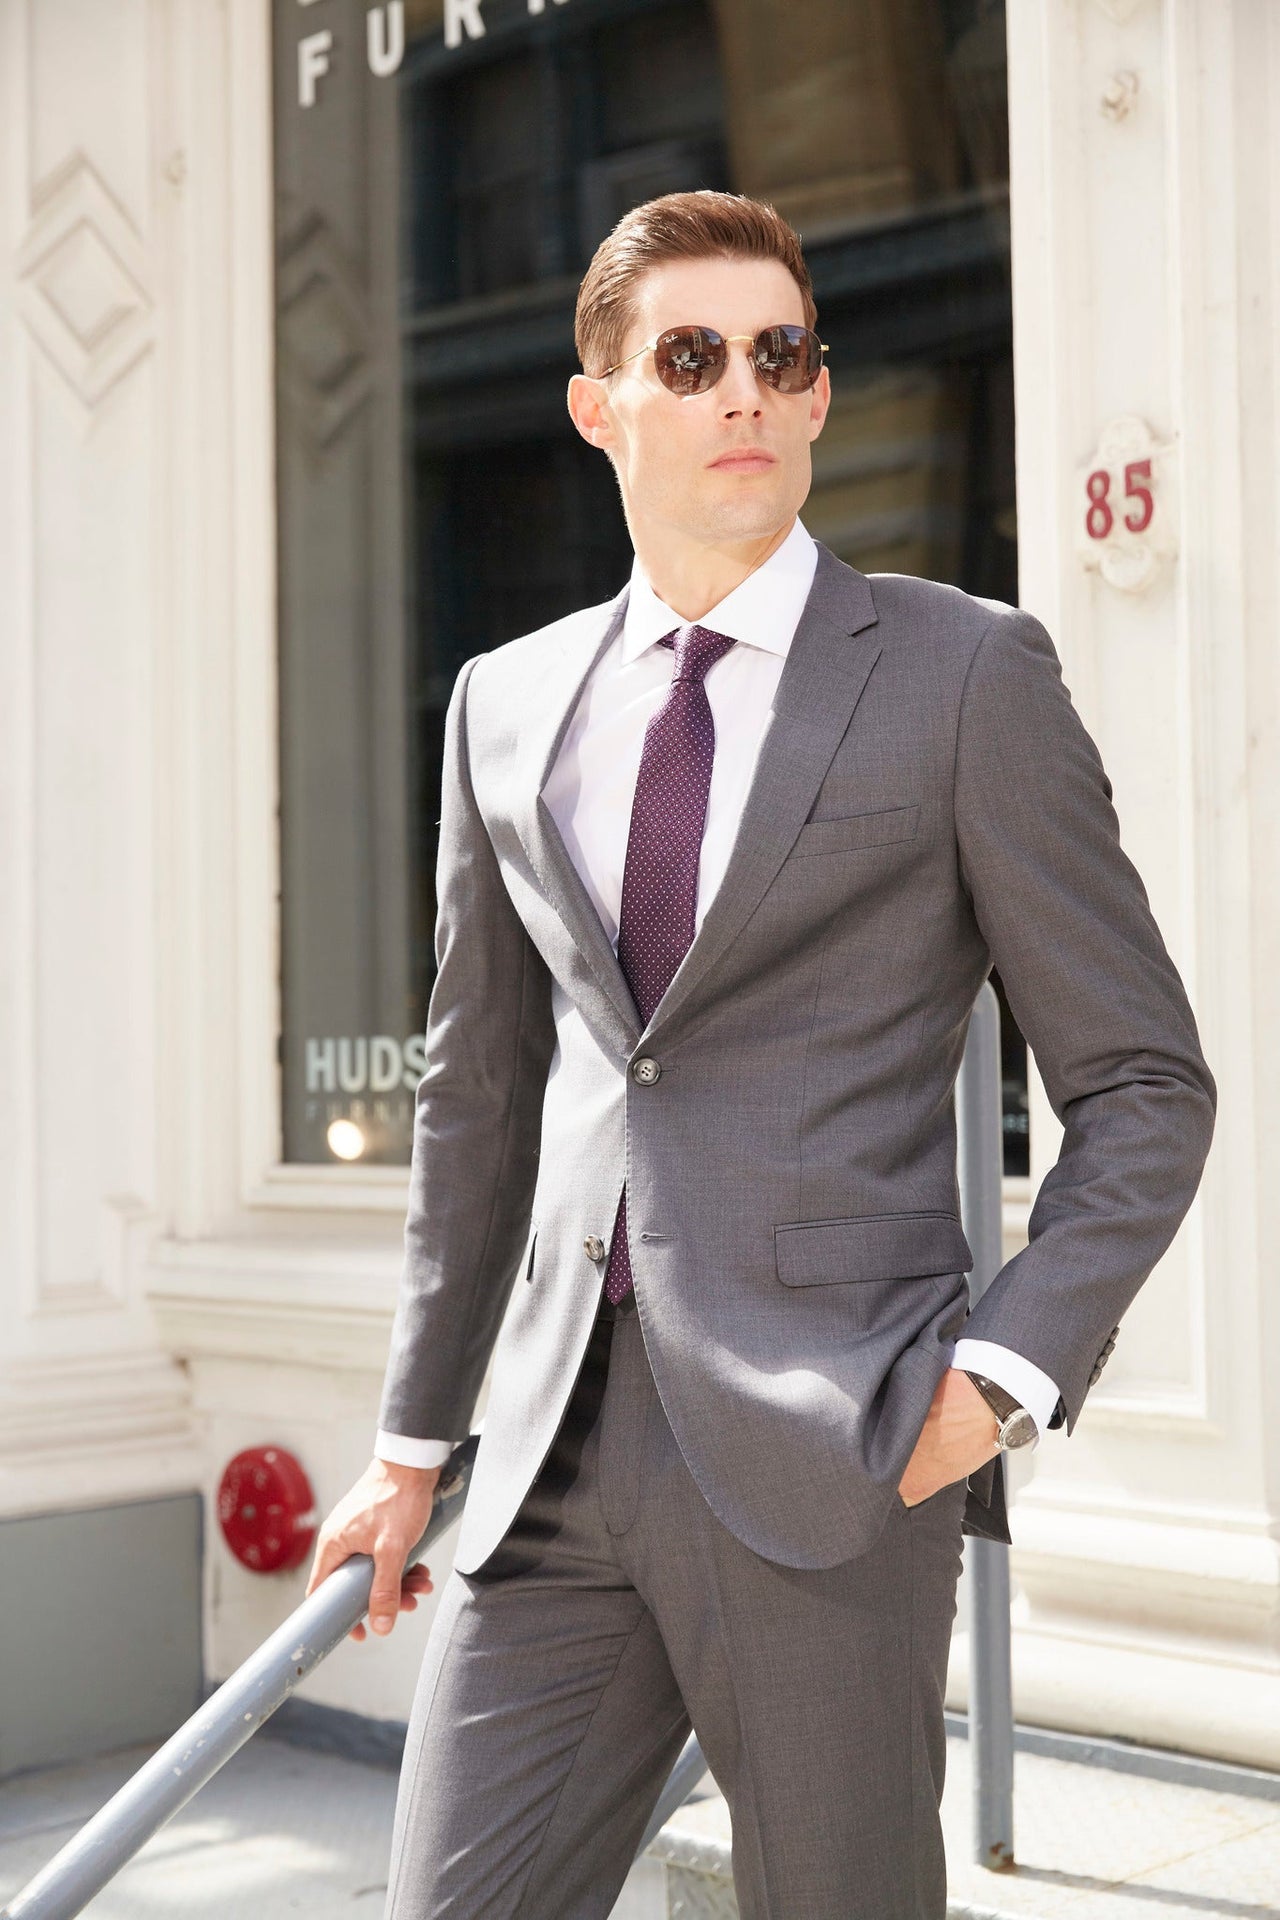 20 Types of Suits for Men: Guide to Men's Suit Styles